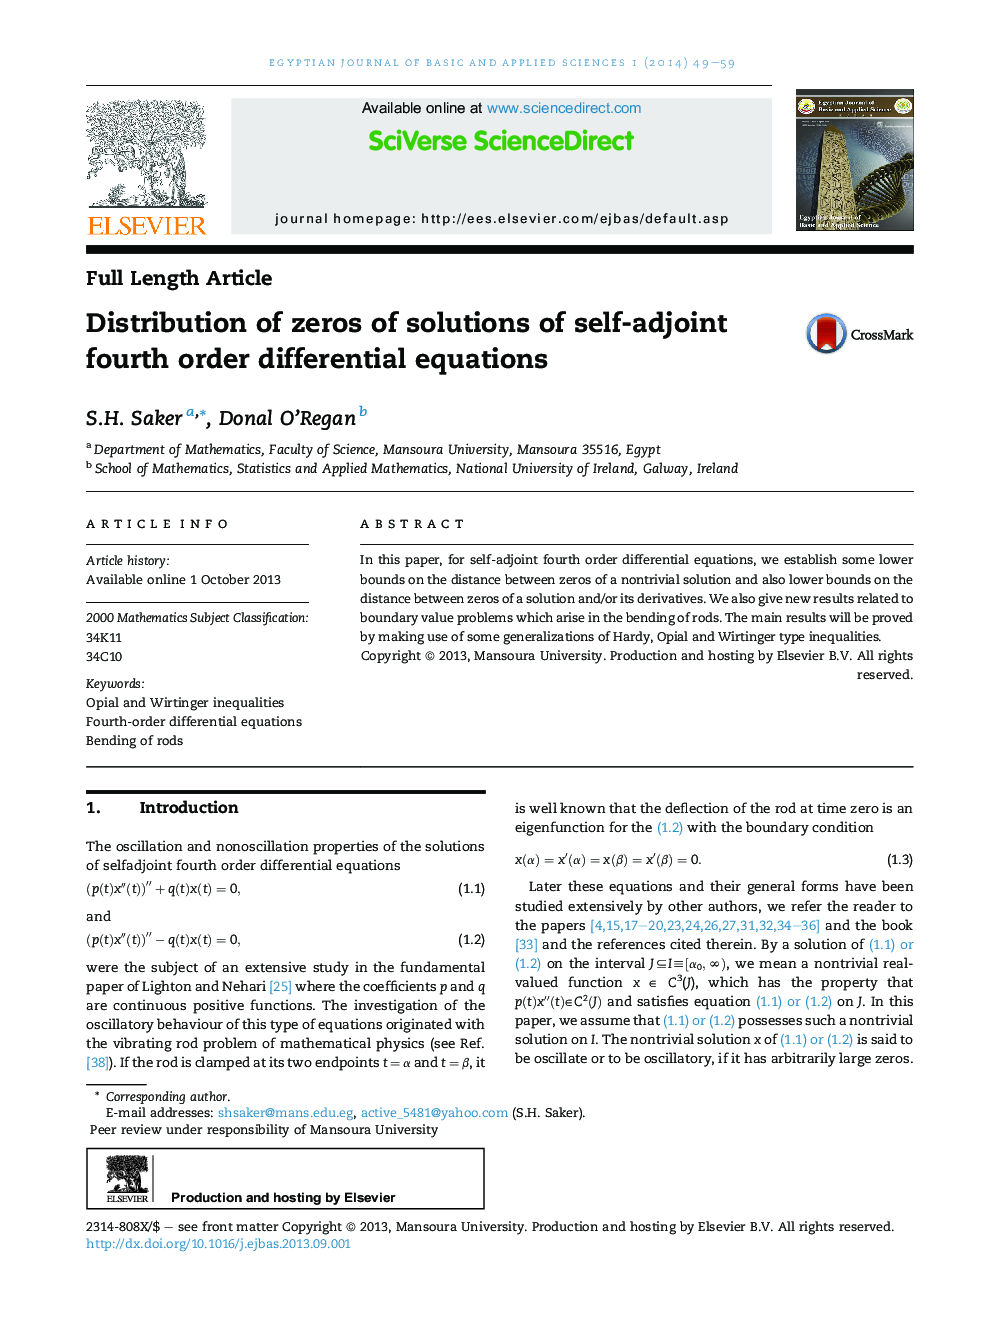 Distribution of zeros of solutions of self-adjoint fourth order differential equations 